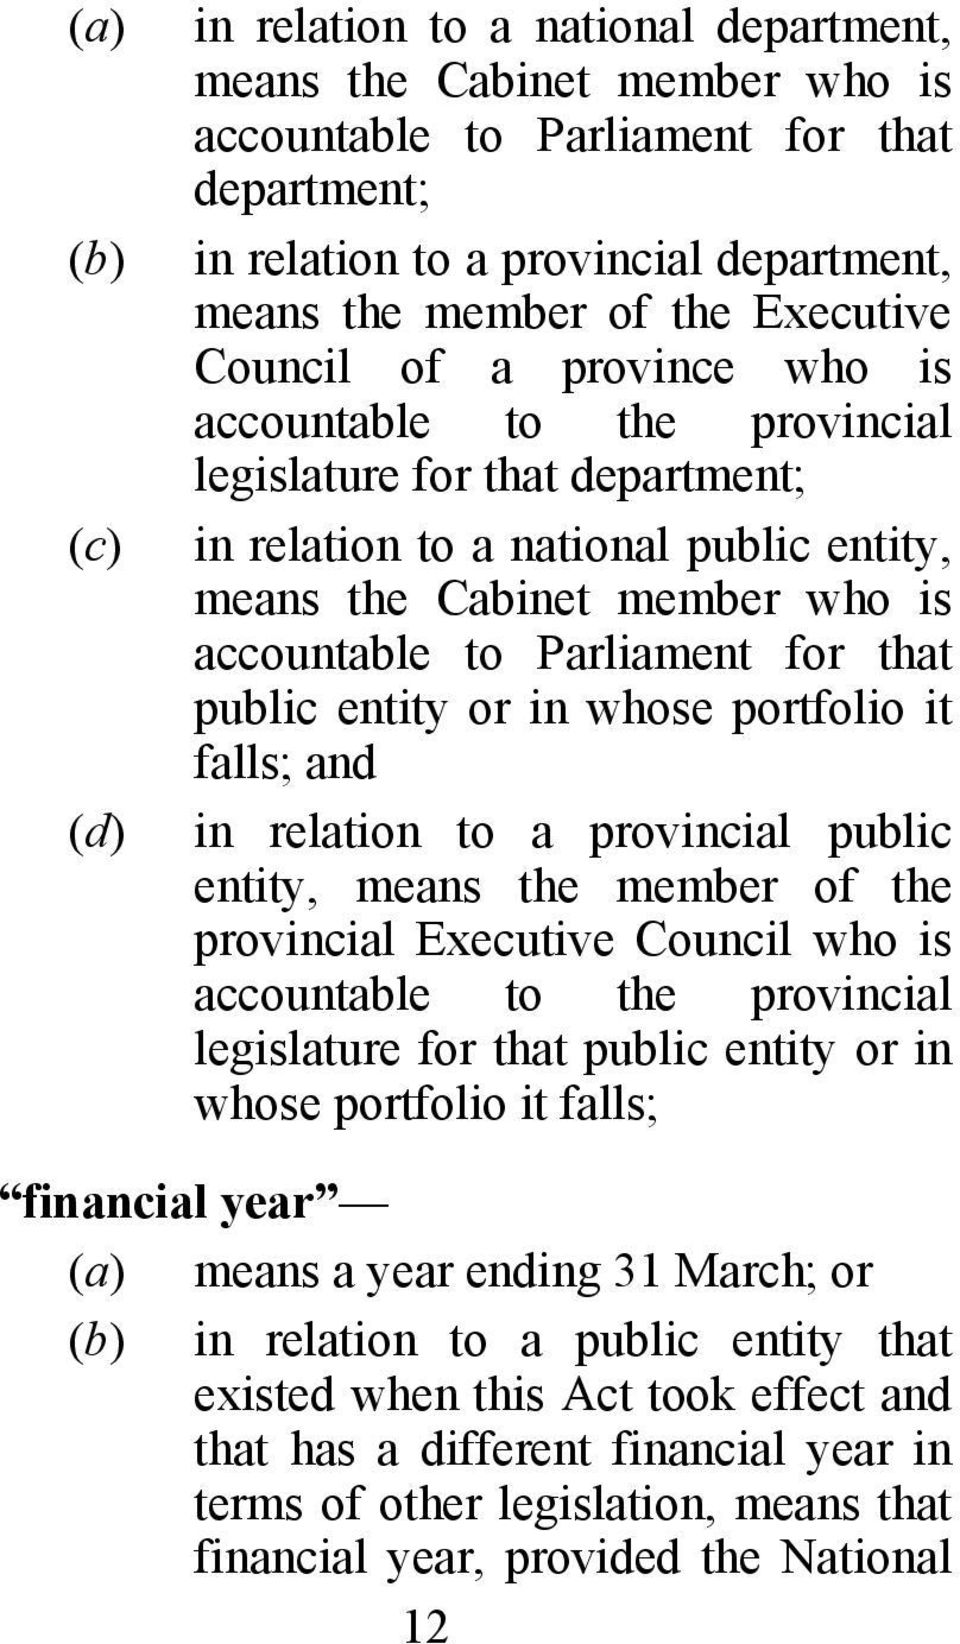 that public entity or in whose portfolio it falls; and (d) in relation to a provincial public entity, means the member of the provincial Executive Council who is accountable to the provincial